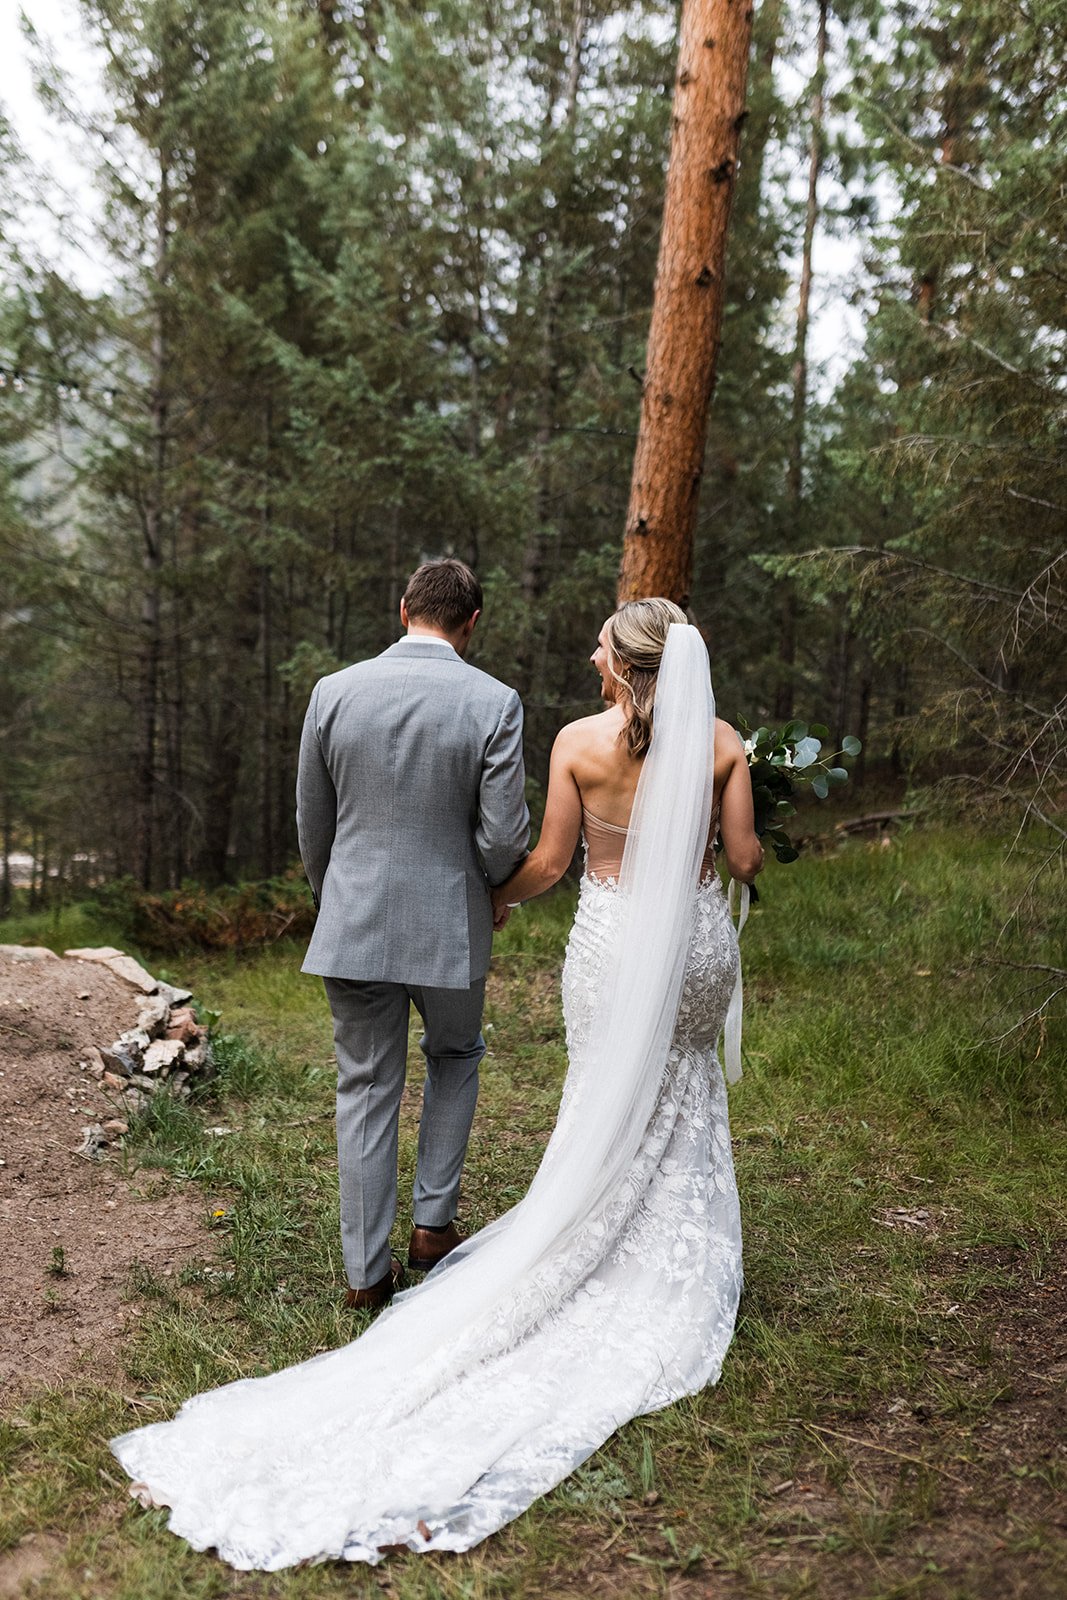  Photograph of a bride and groom walking away after exchanging vows for their intimate woodland elopement in the mountains. The bride is wearing the Made With Love Penny dress, which has a long lace train that is trailing her bind her along with her 